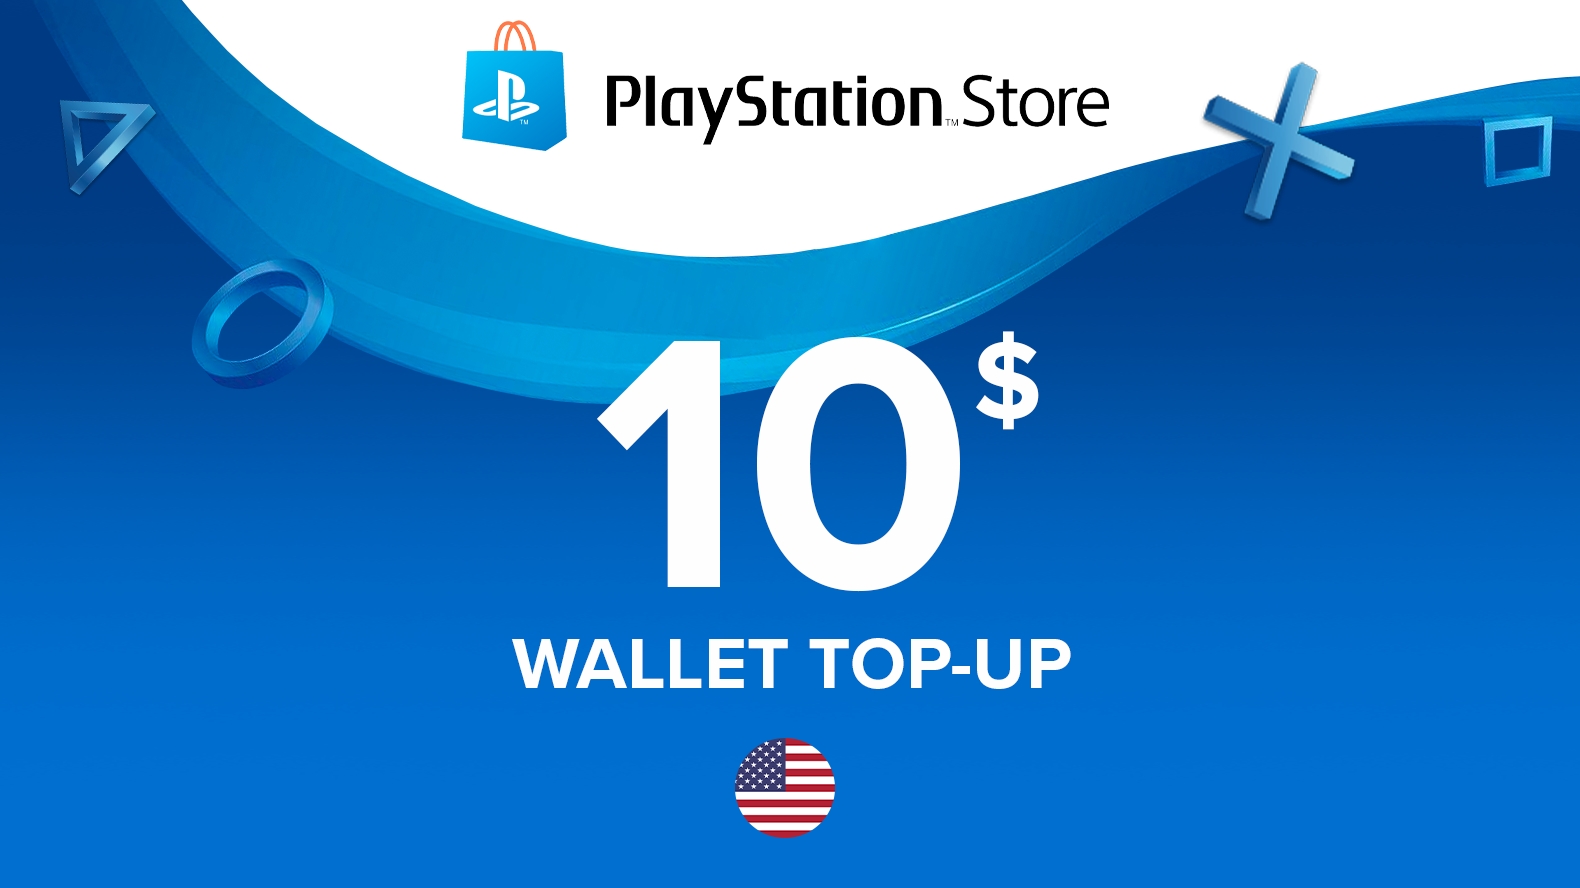 Can I Buy Games from the US PSN Store Using a US PSN Gift Card?